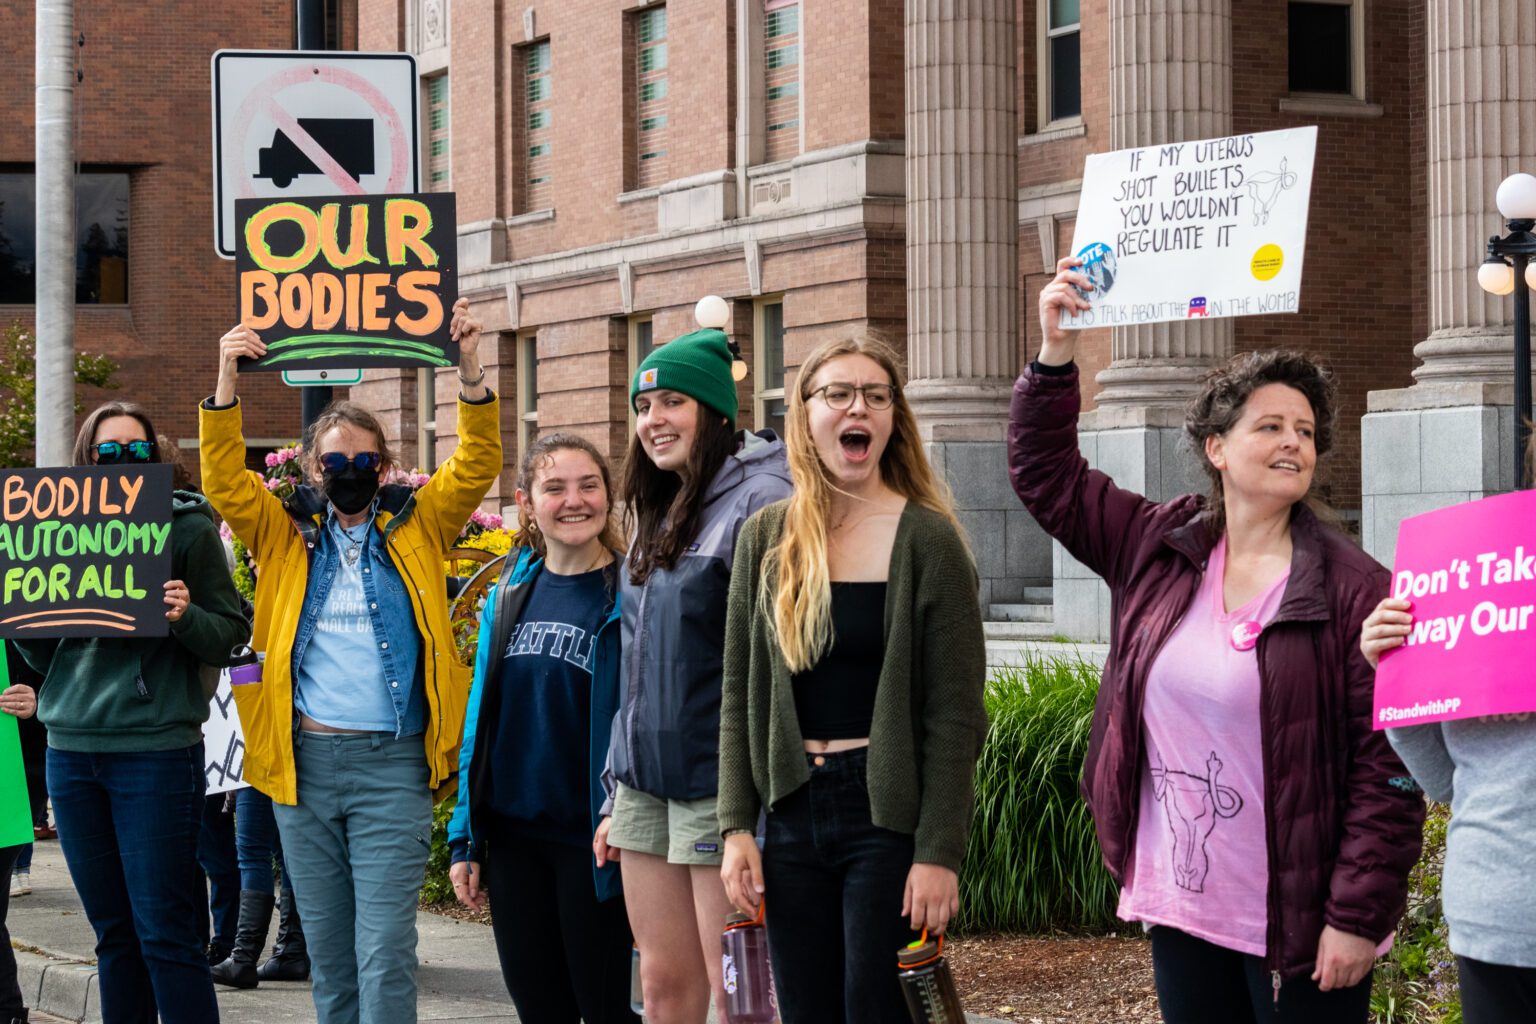 Reproductive rights protesters wave their signs at passing cars during the The Bans Off Our Bodies rally at the Skagit County Superior Courthouse in Mount Vernon on May 14.